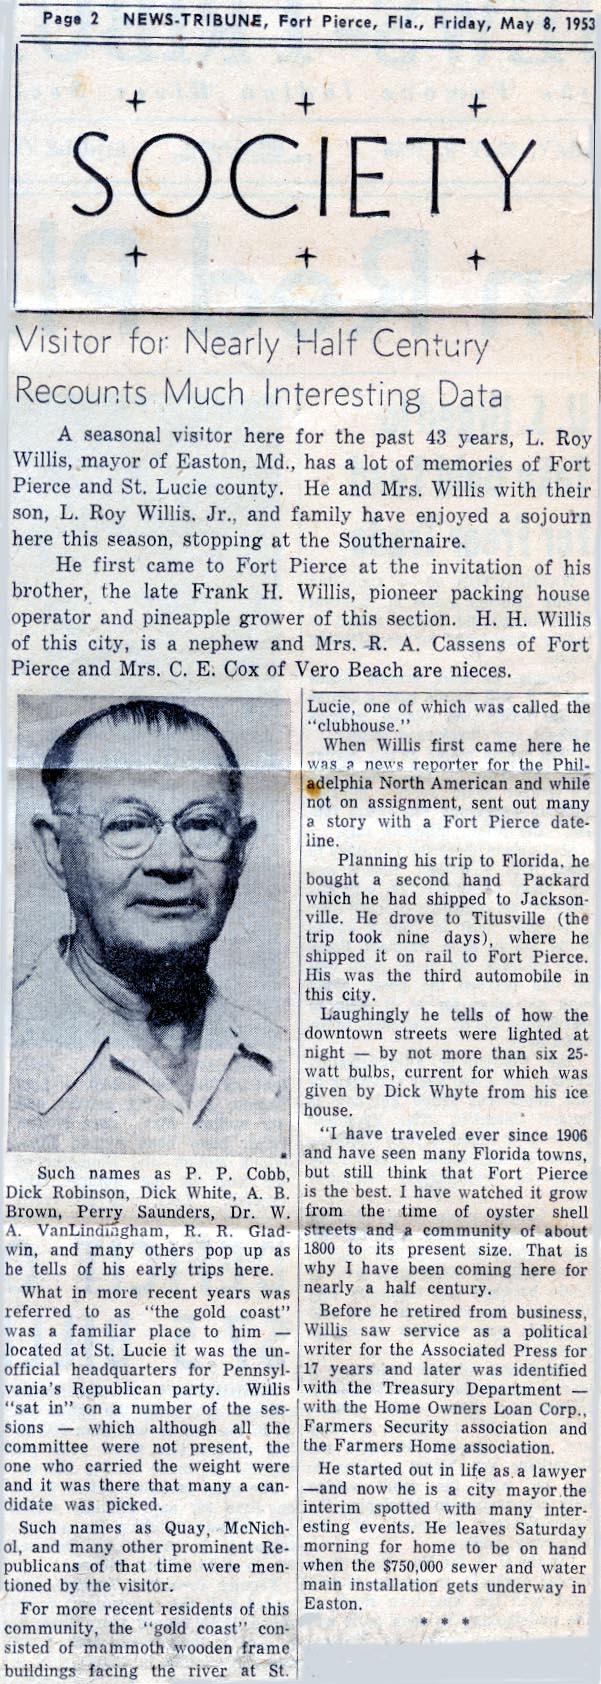 Newsclipping of L. Roy Willis visit to Fort Pierce, Florida